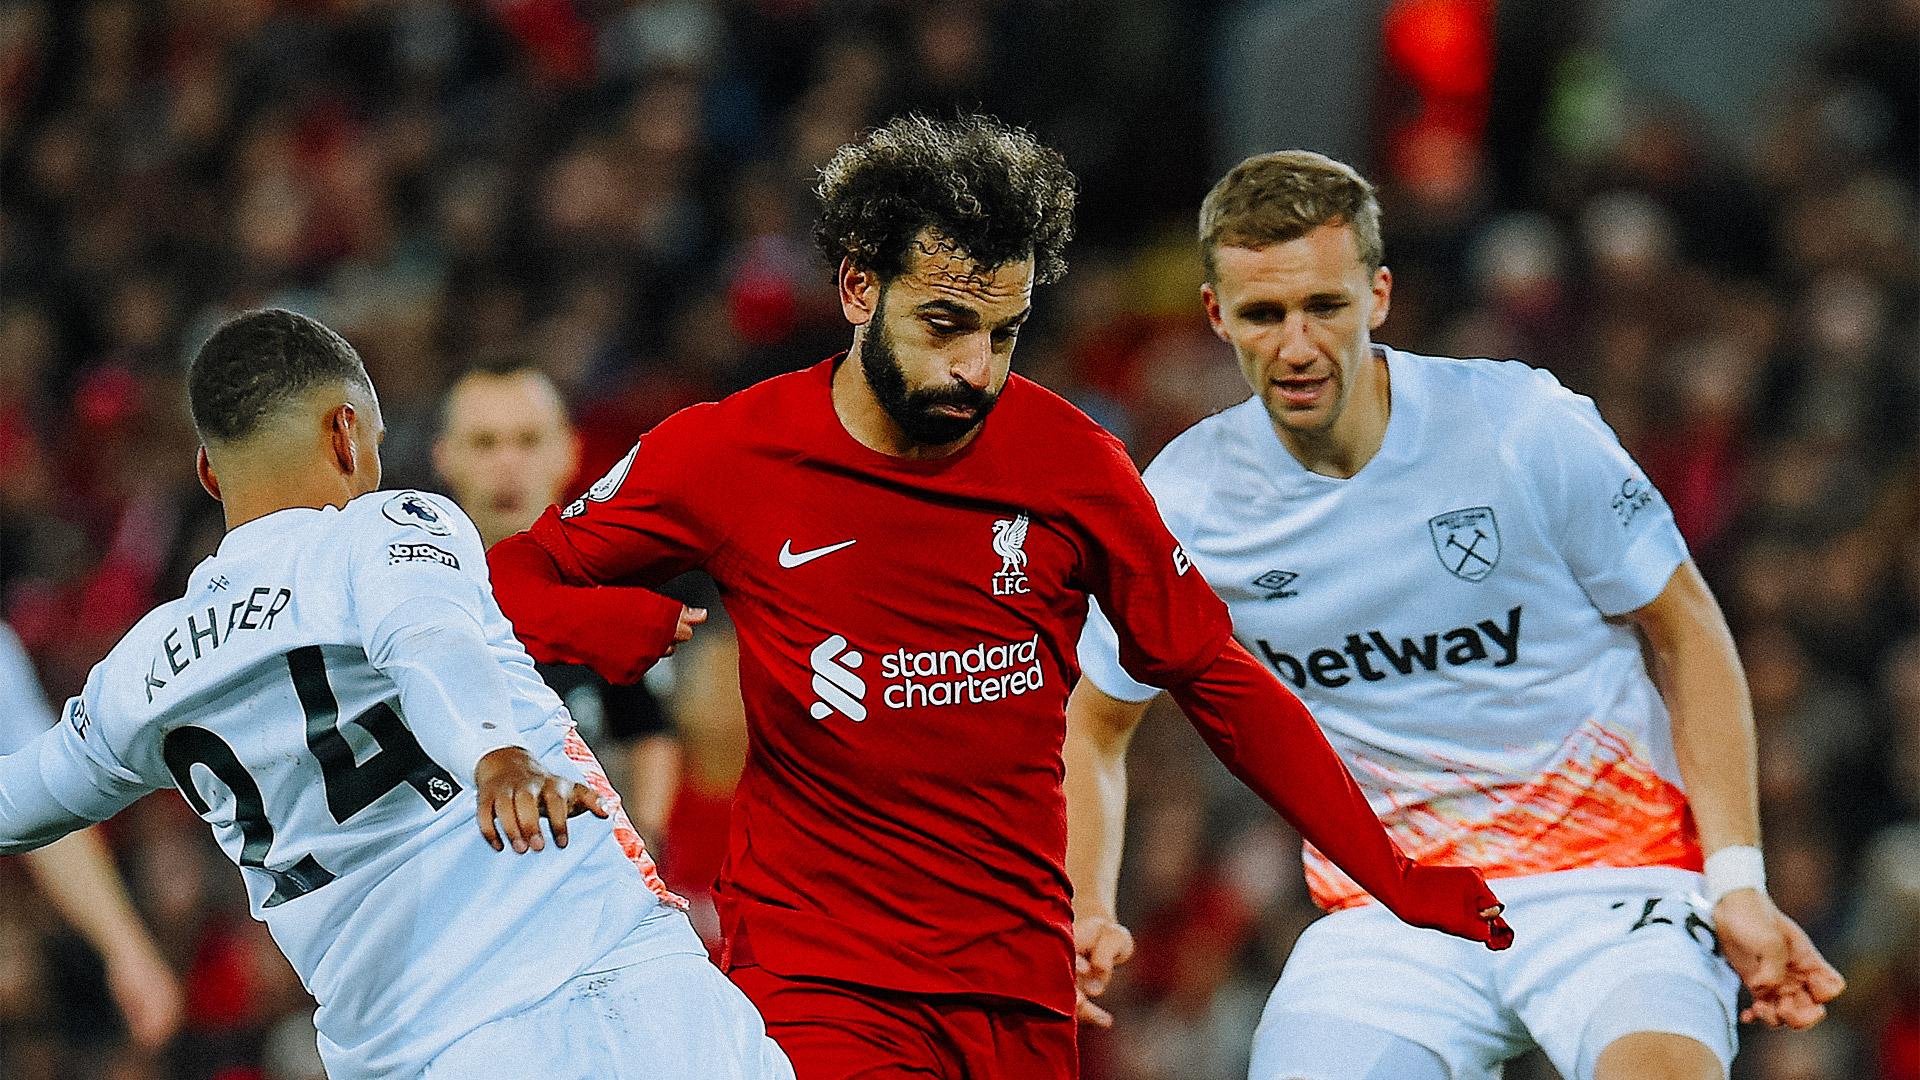 11 key facts and figures ahead of West Ham v Liverpool - Liverpool FC